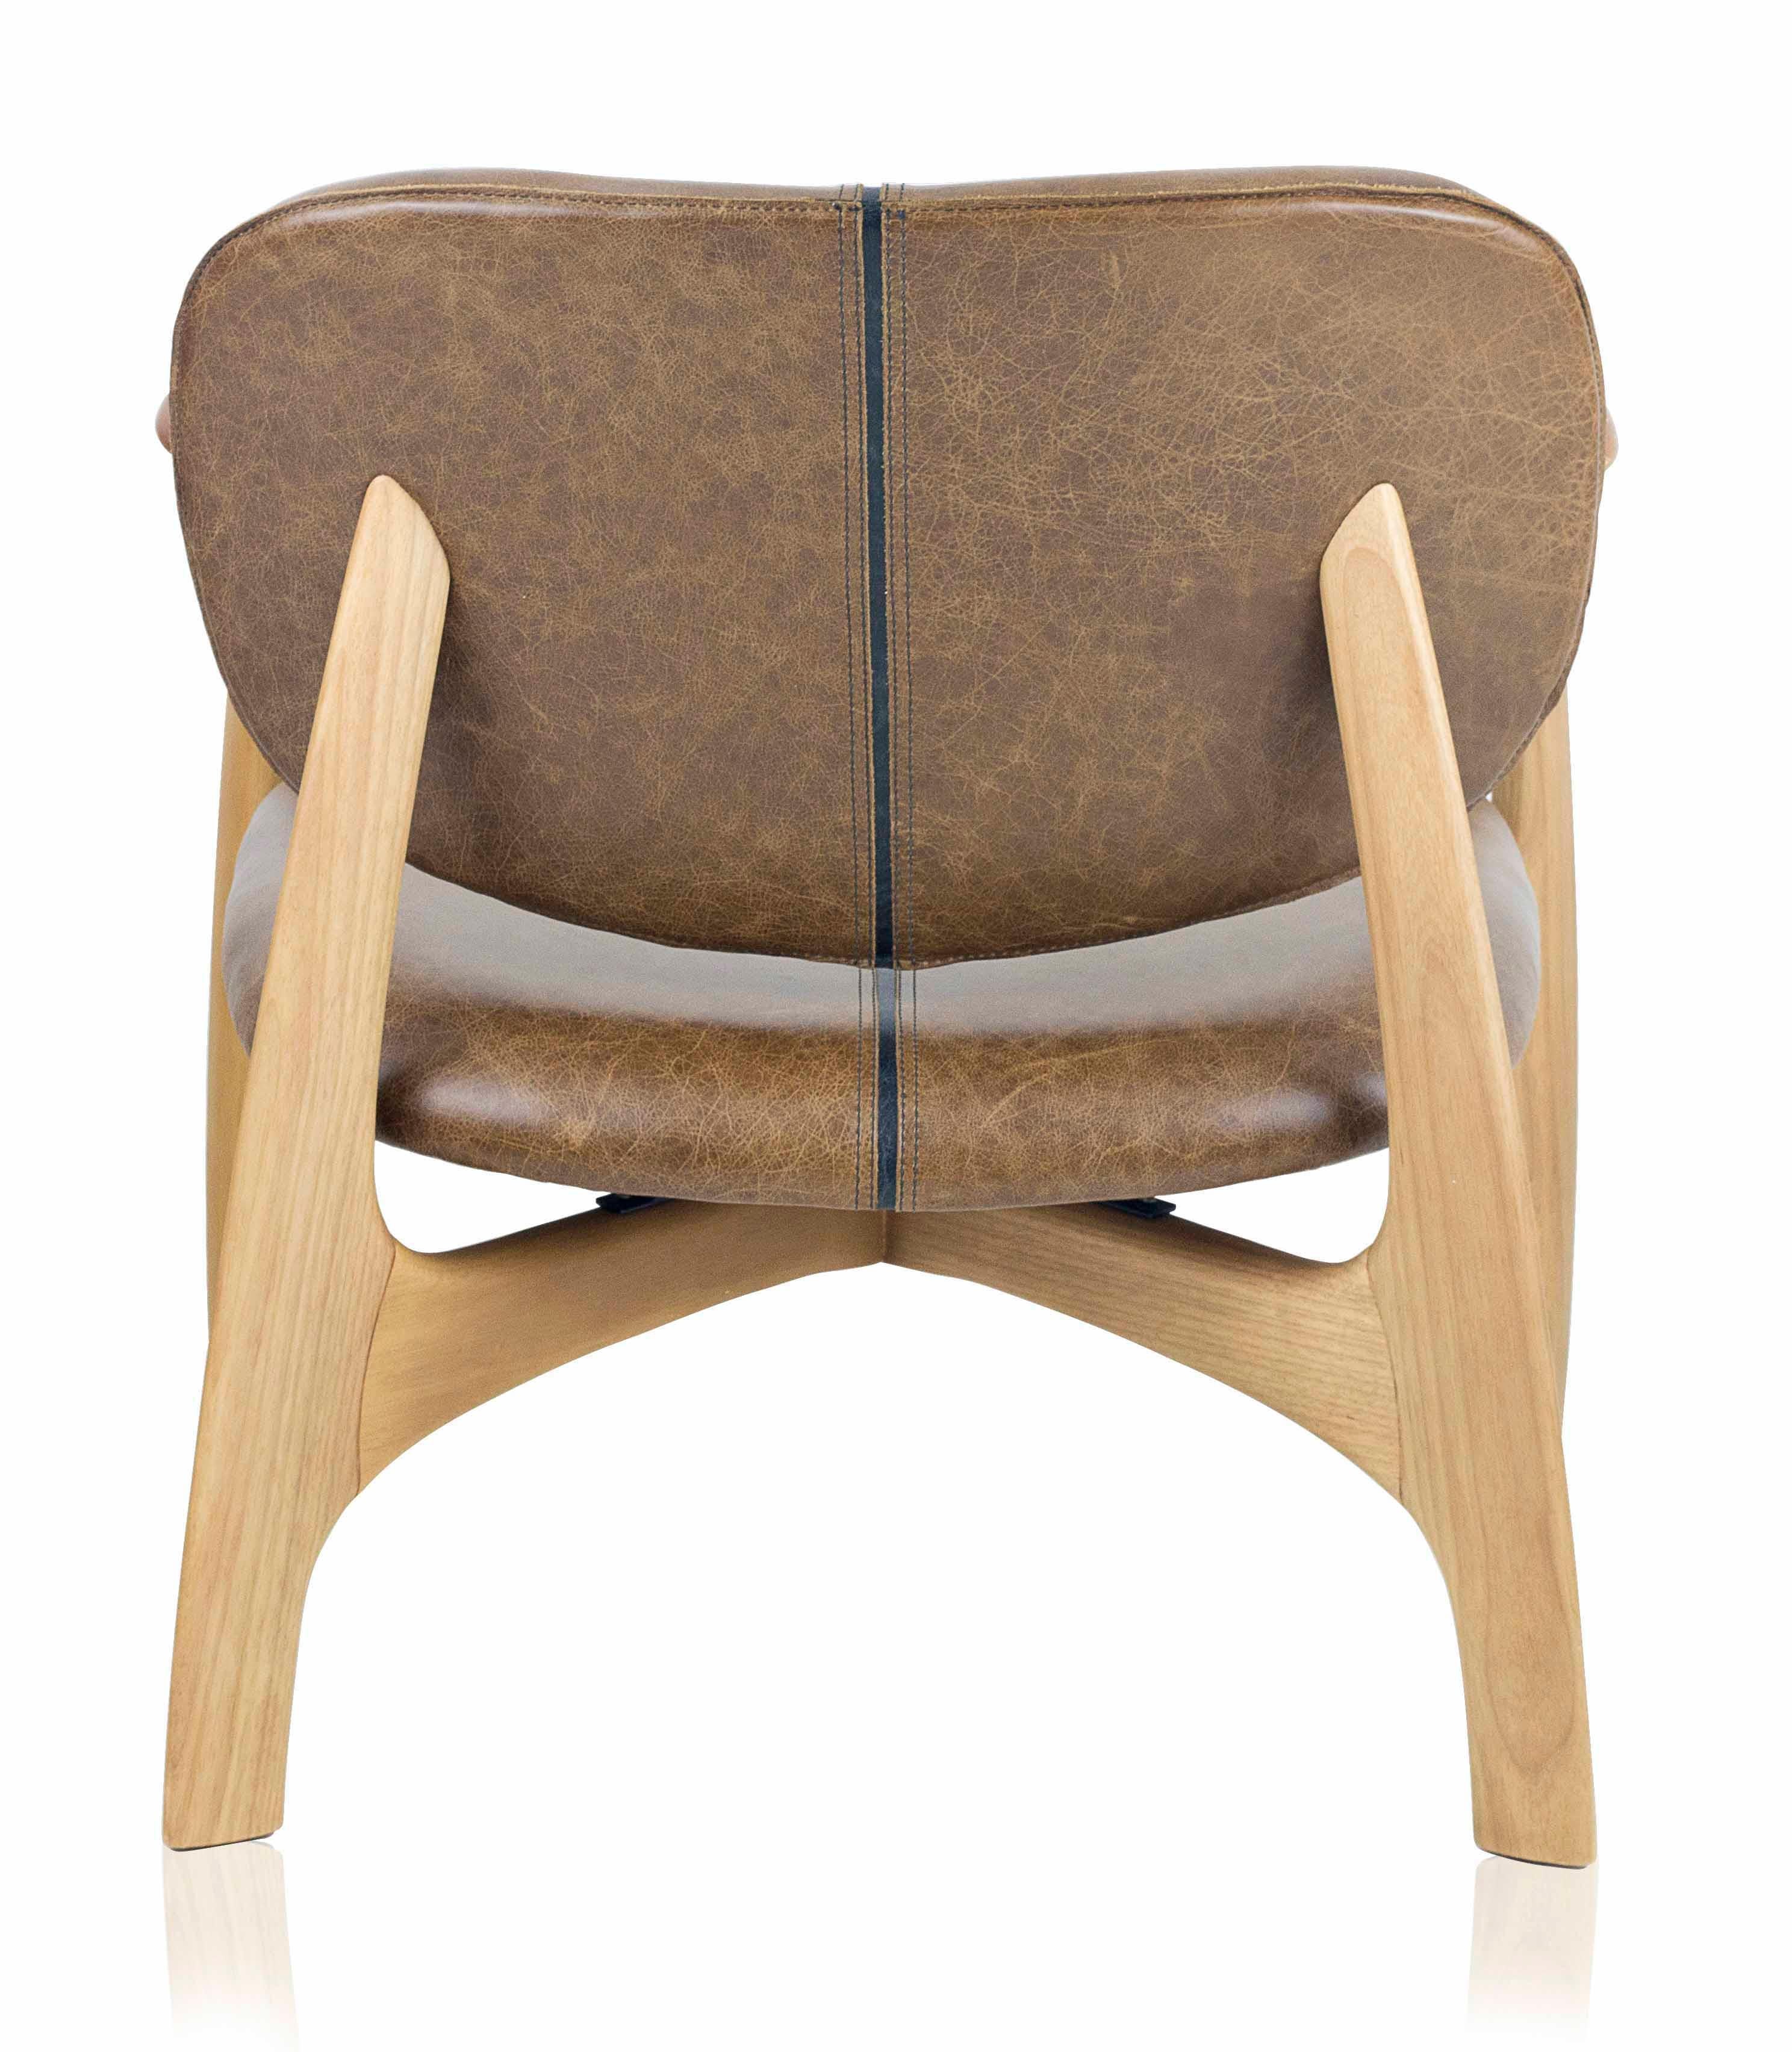 Surf Brazilian Contemporary Wood and Leather Easychair by Lattoog In New Condition For Sale In Sao Paolo, BR